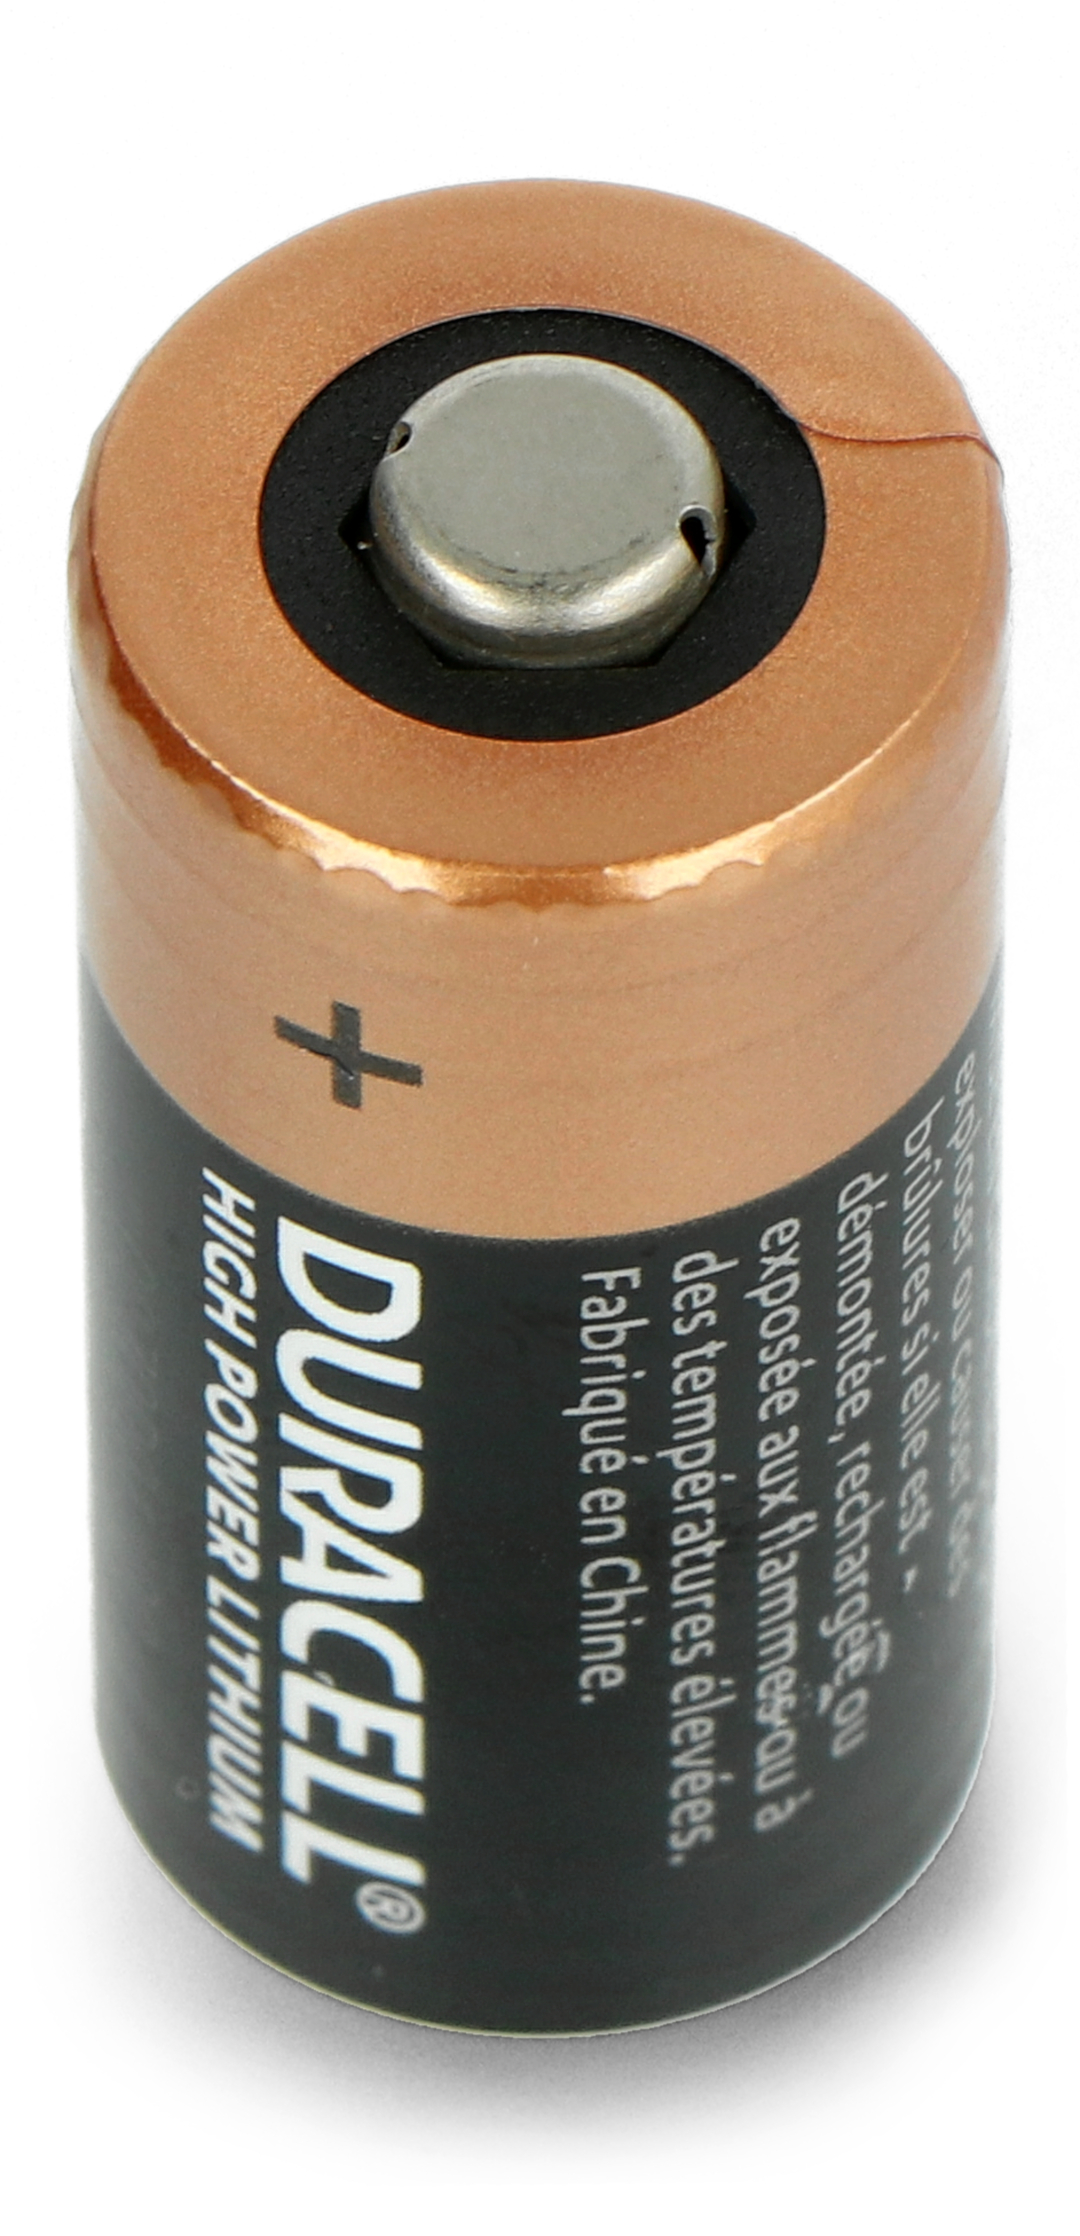 Duracell 2450 Lithium 3V - Pile & chargeur - LDLC